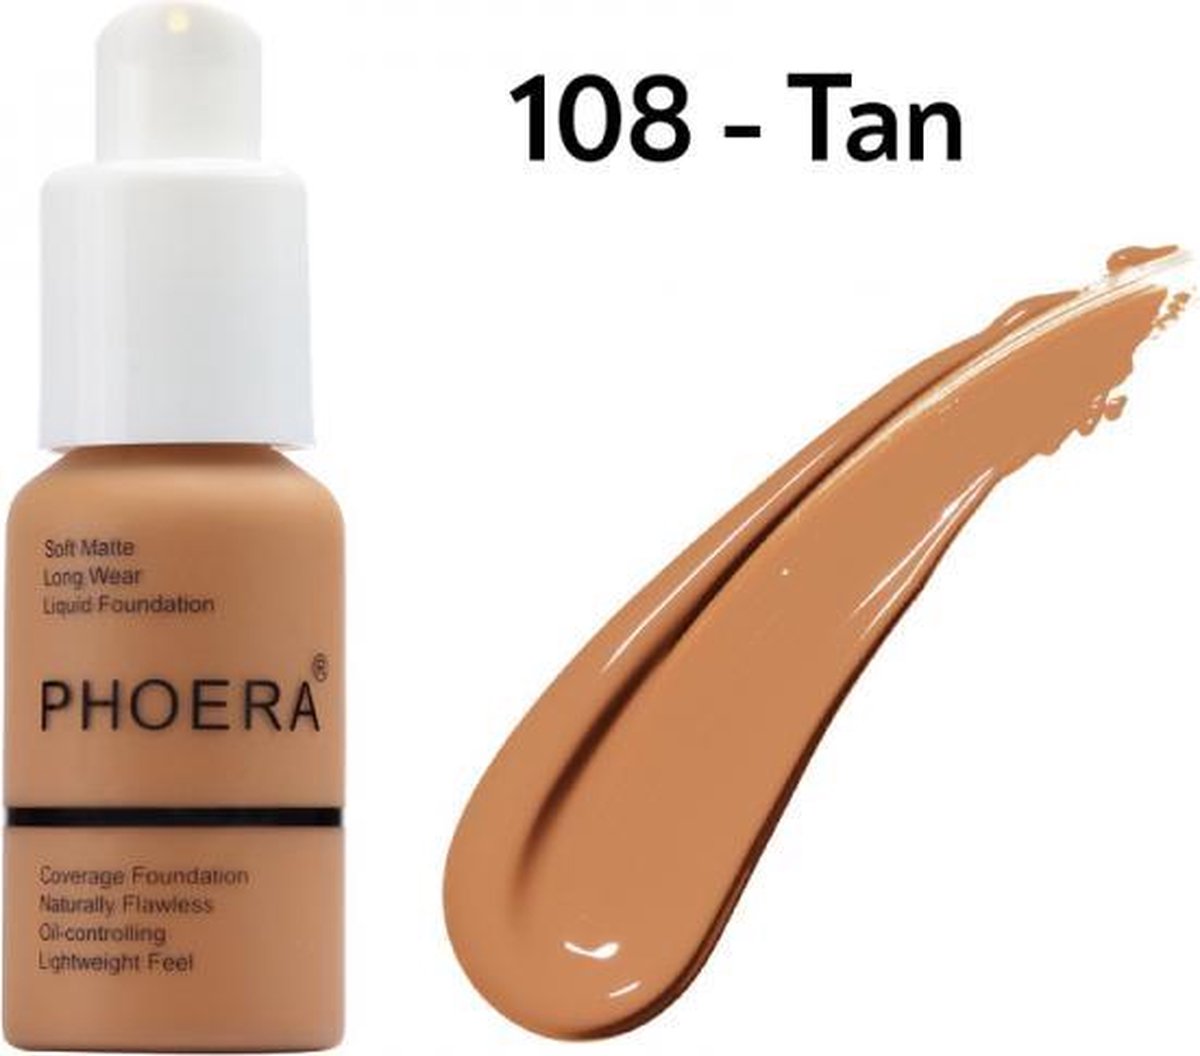 PHOERA™ Full Coverage Foundation - 108 - Tan